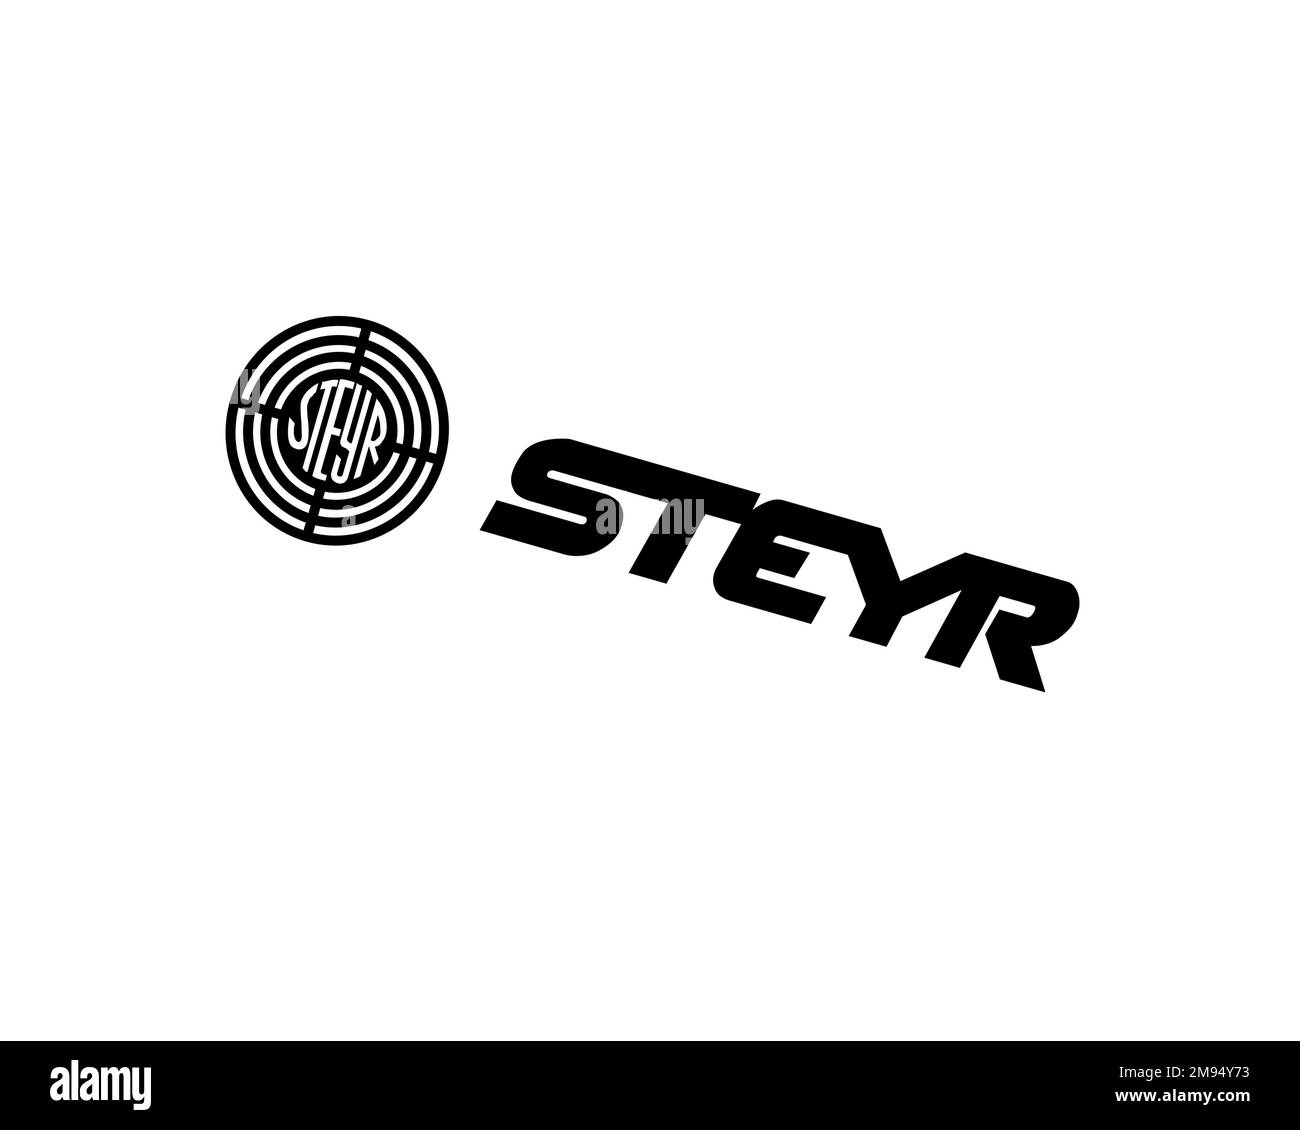 Steyr Daimler Puch, rotated logo, white background B Stock Photo